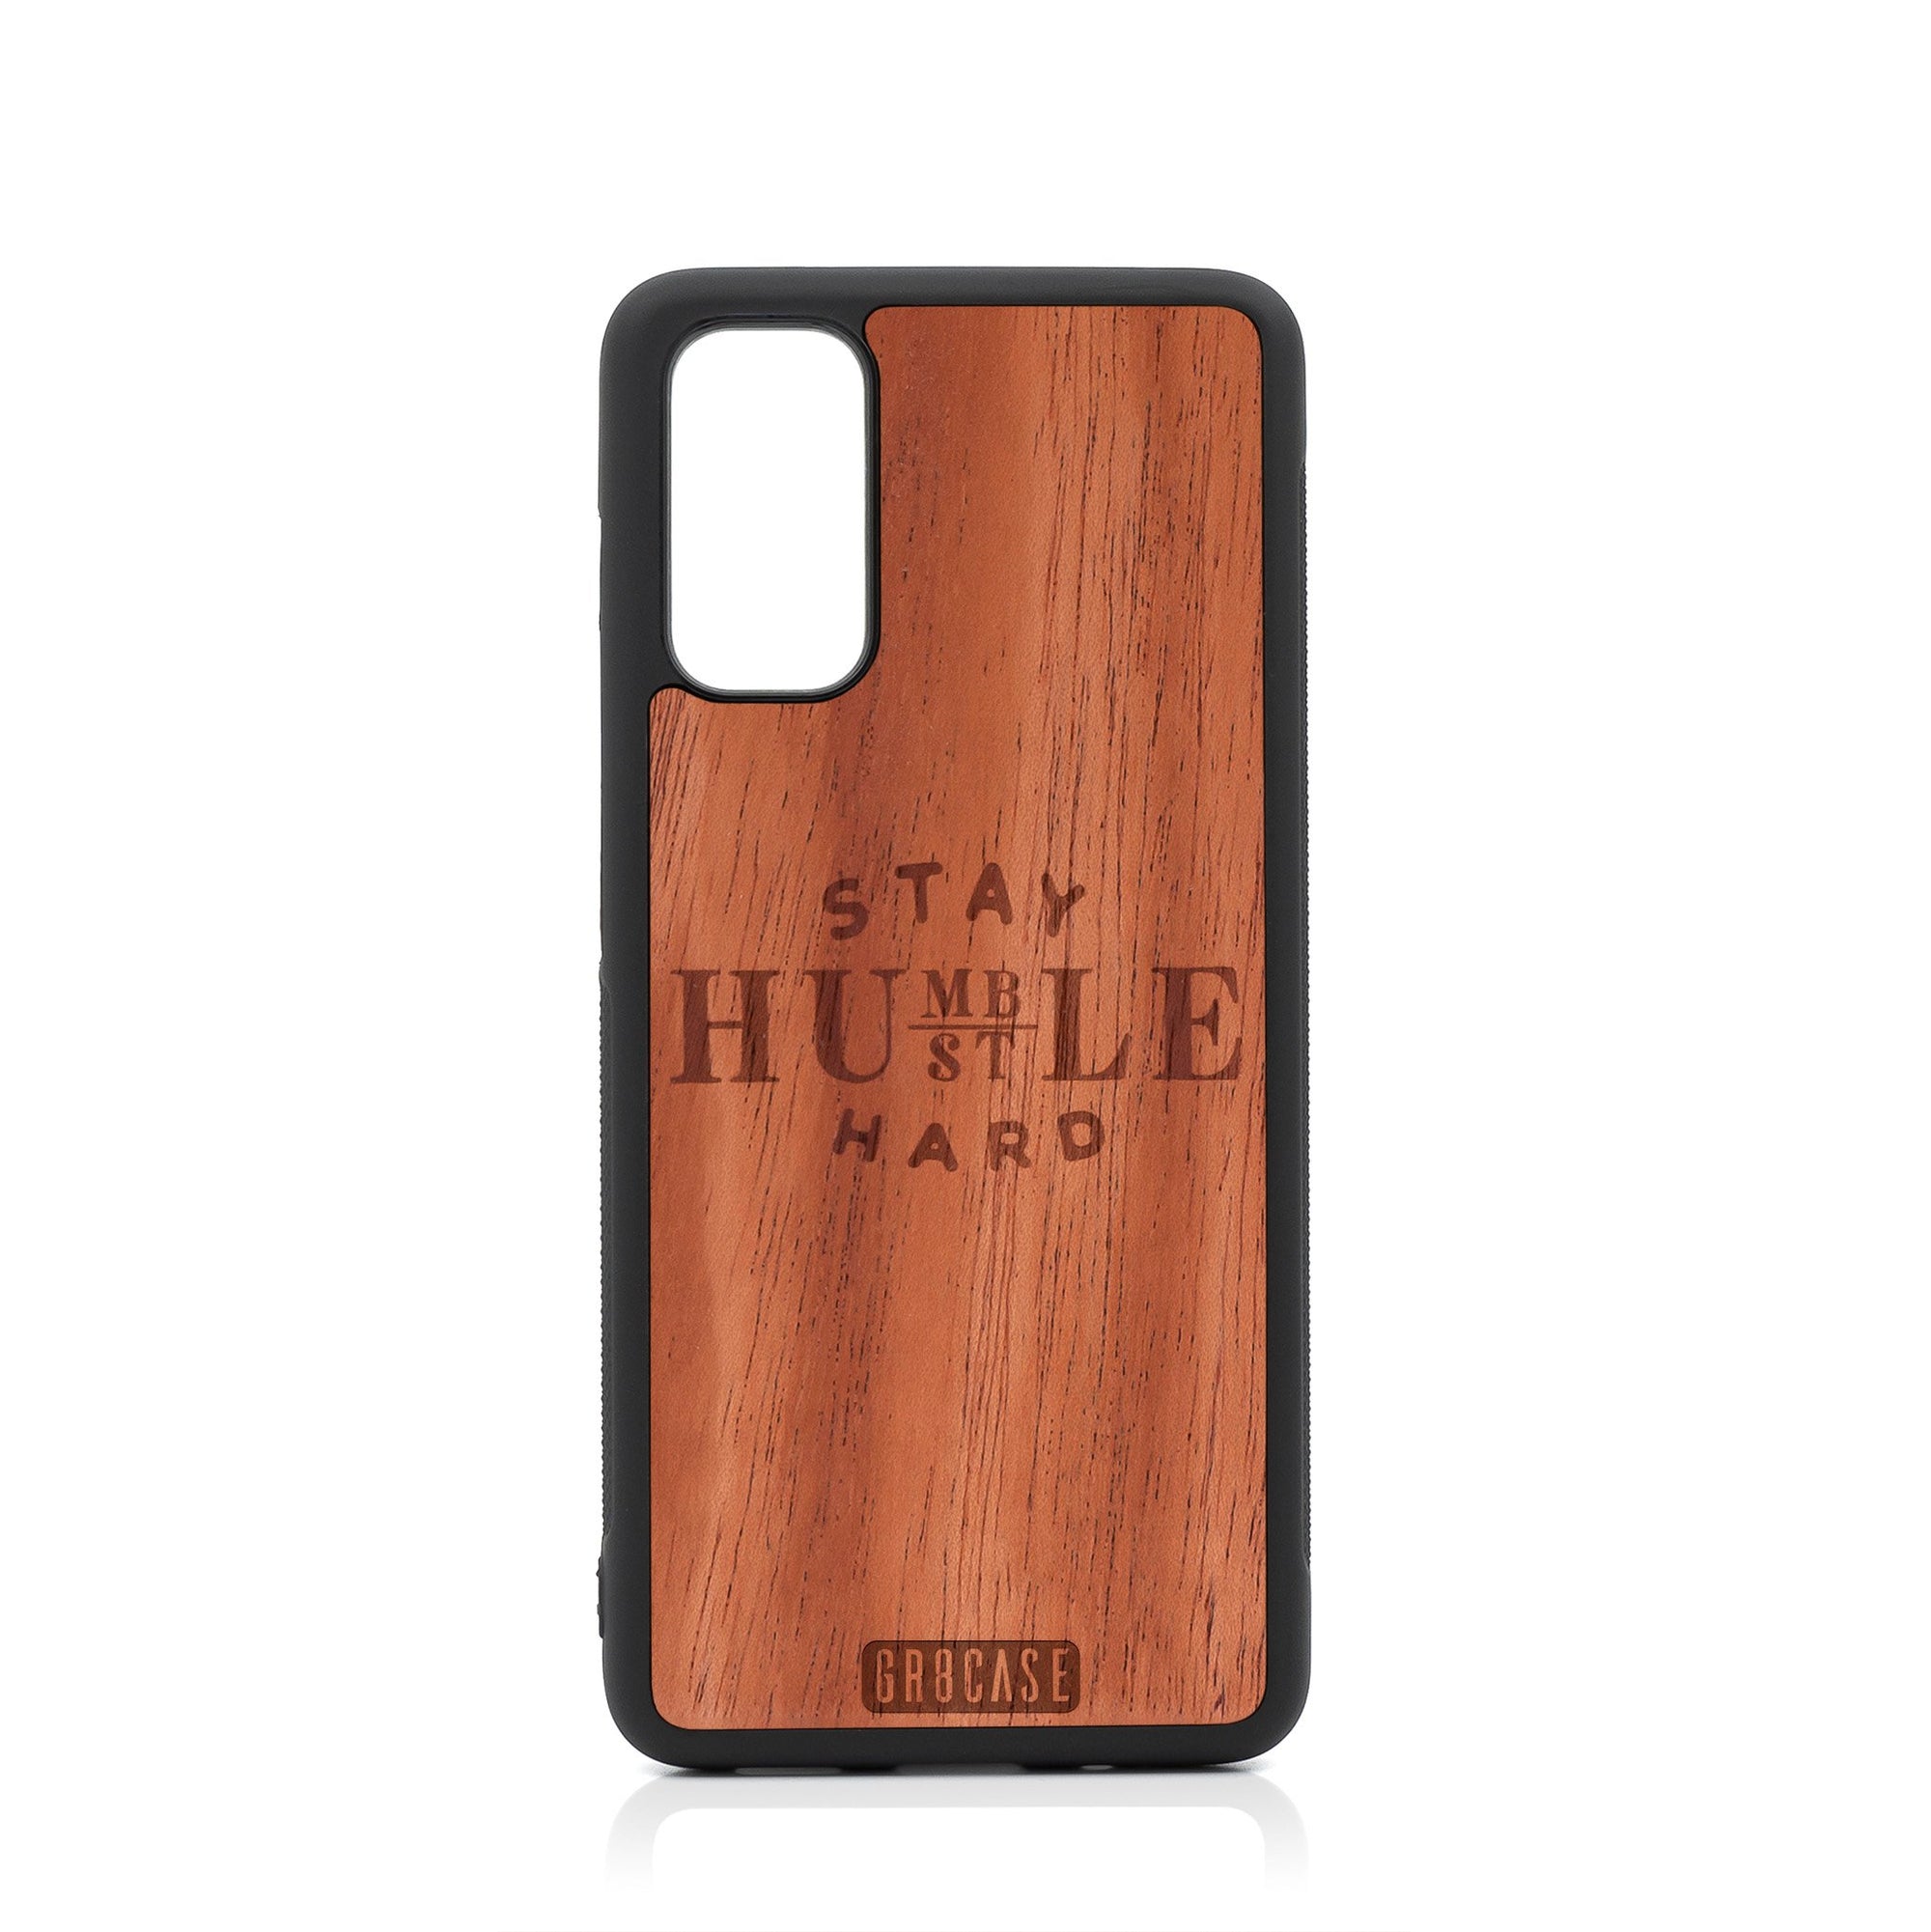 Stay Humble Hustle Hard Design Wood Case For Samsung Galaxy S20 FE 5G by GR8CASE